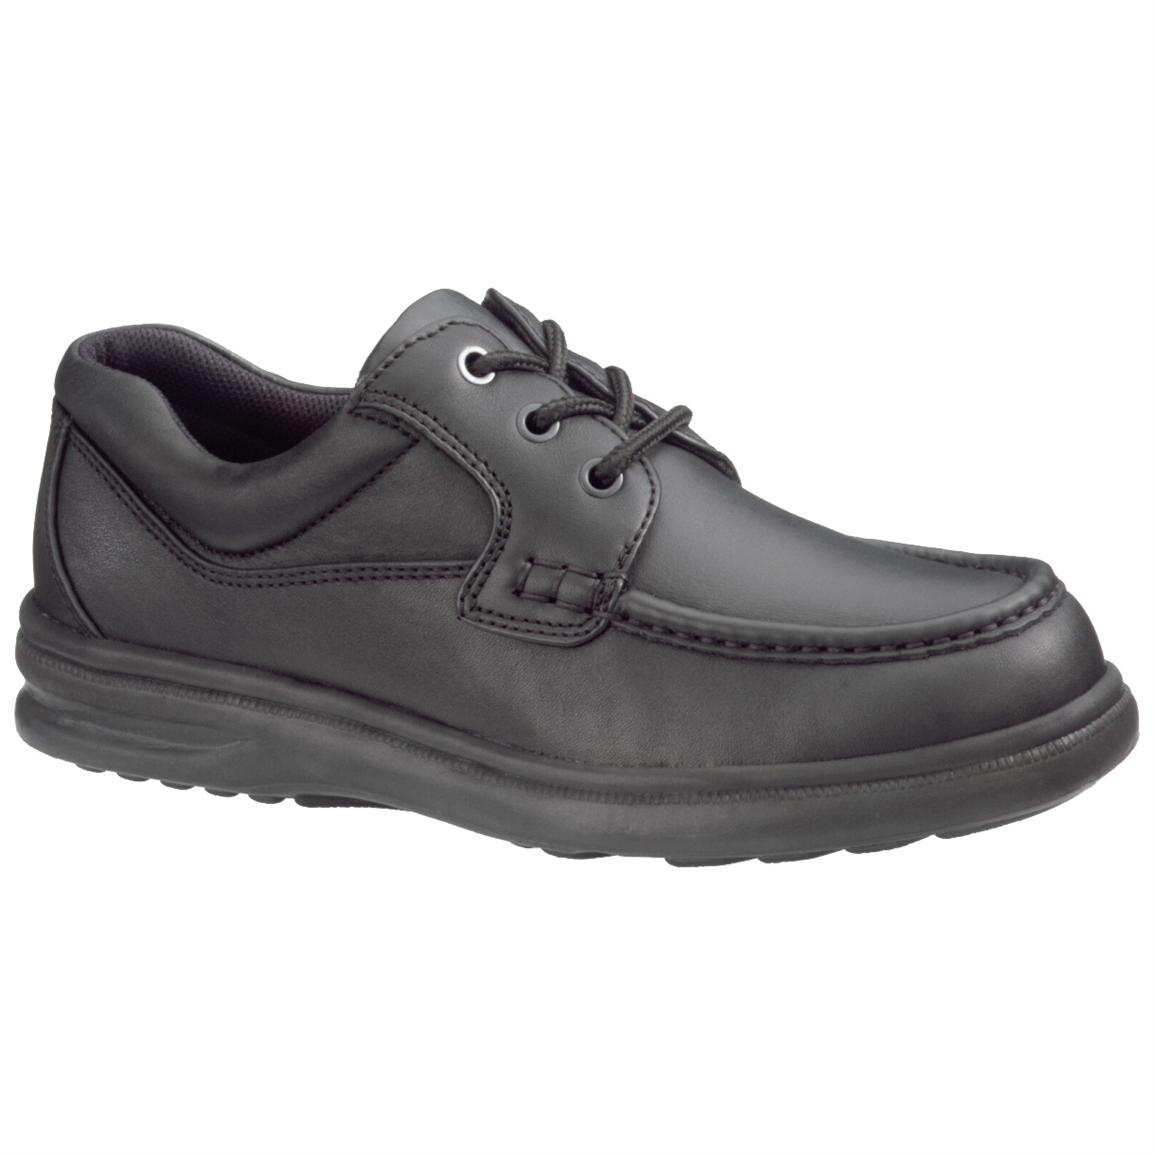 Men's Hush Puppies® Gus Shoes - 153131, Casual Shoes at Sportsman's Guide